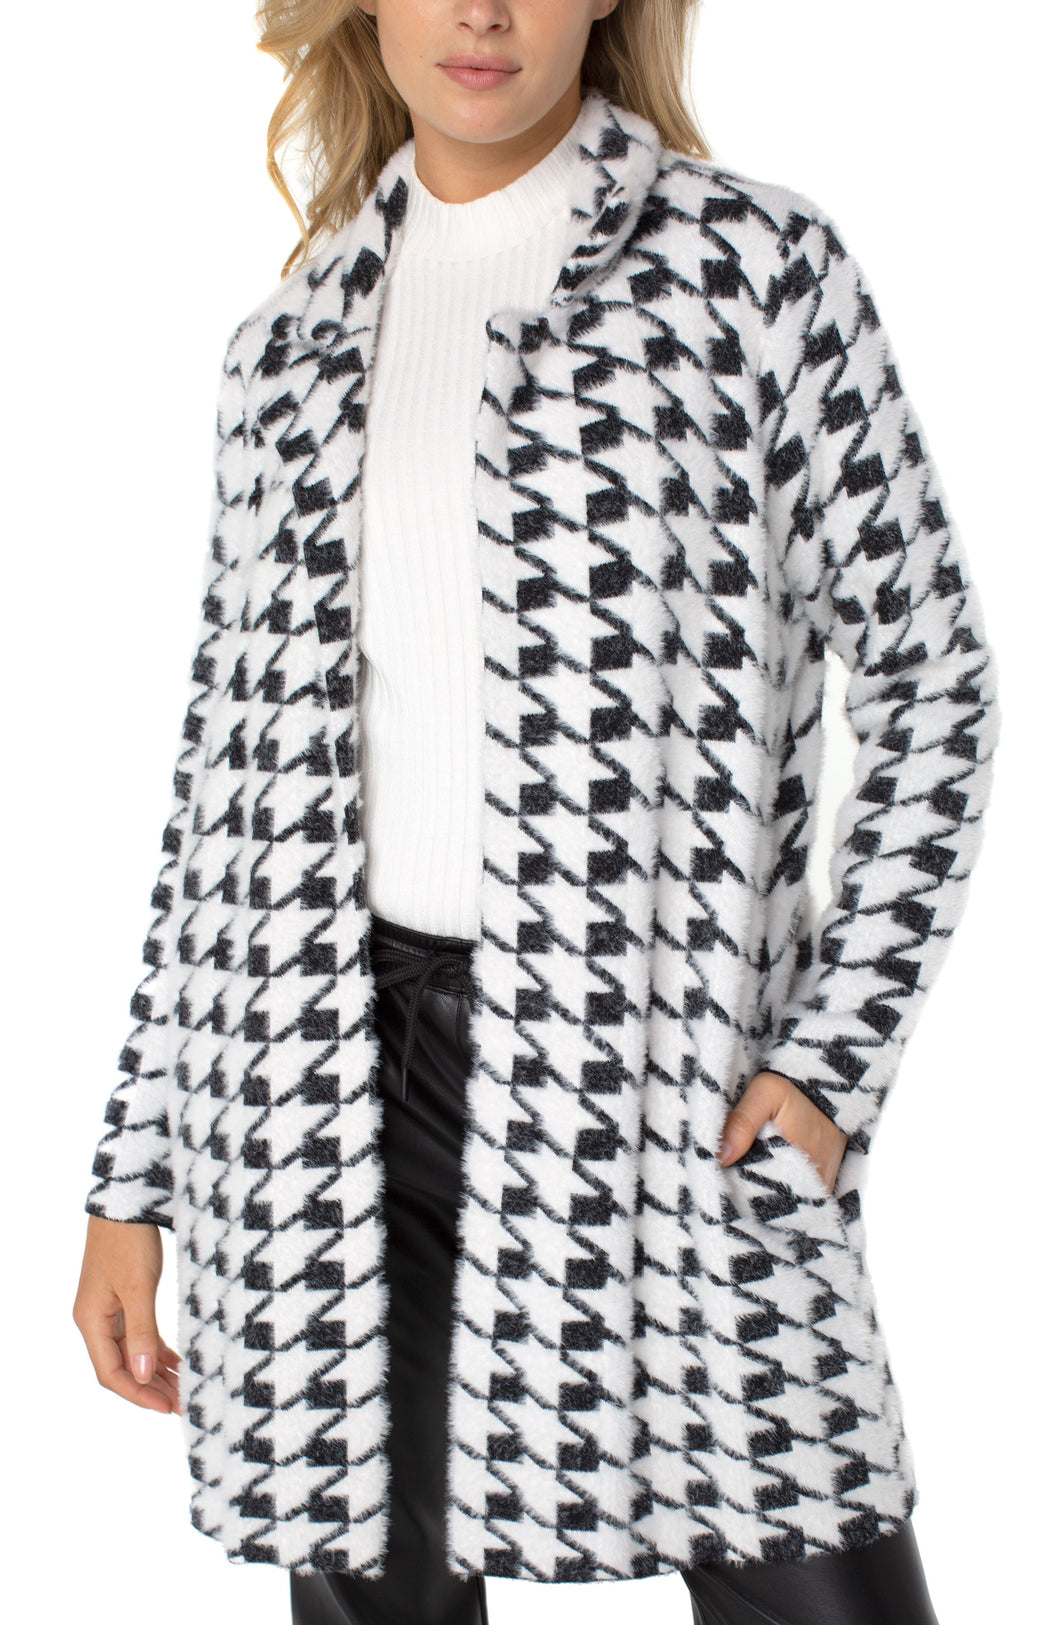 A beautiful combination of a cardigan and a coat creates a coatigan that is warm enough to wear during those cold nights but comfortable enough to wear indoors. Soft and fuzzy, you will wrap yourself in comfort each time you put on this fabulous coatigan. Featuring a beautiful black and white houndstooth pattern, this coatigan pairs well with denim, trousers or leggings!   Color- Black and white. Houndstooth pattern. Open front. Patch pockets.